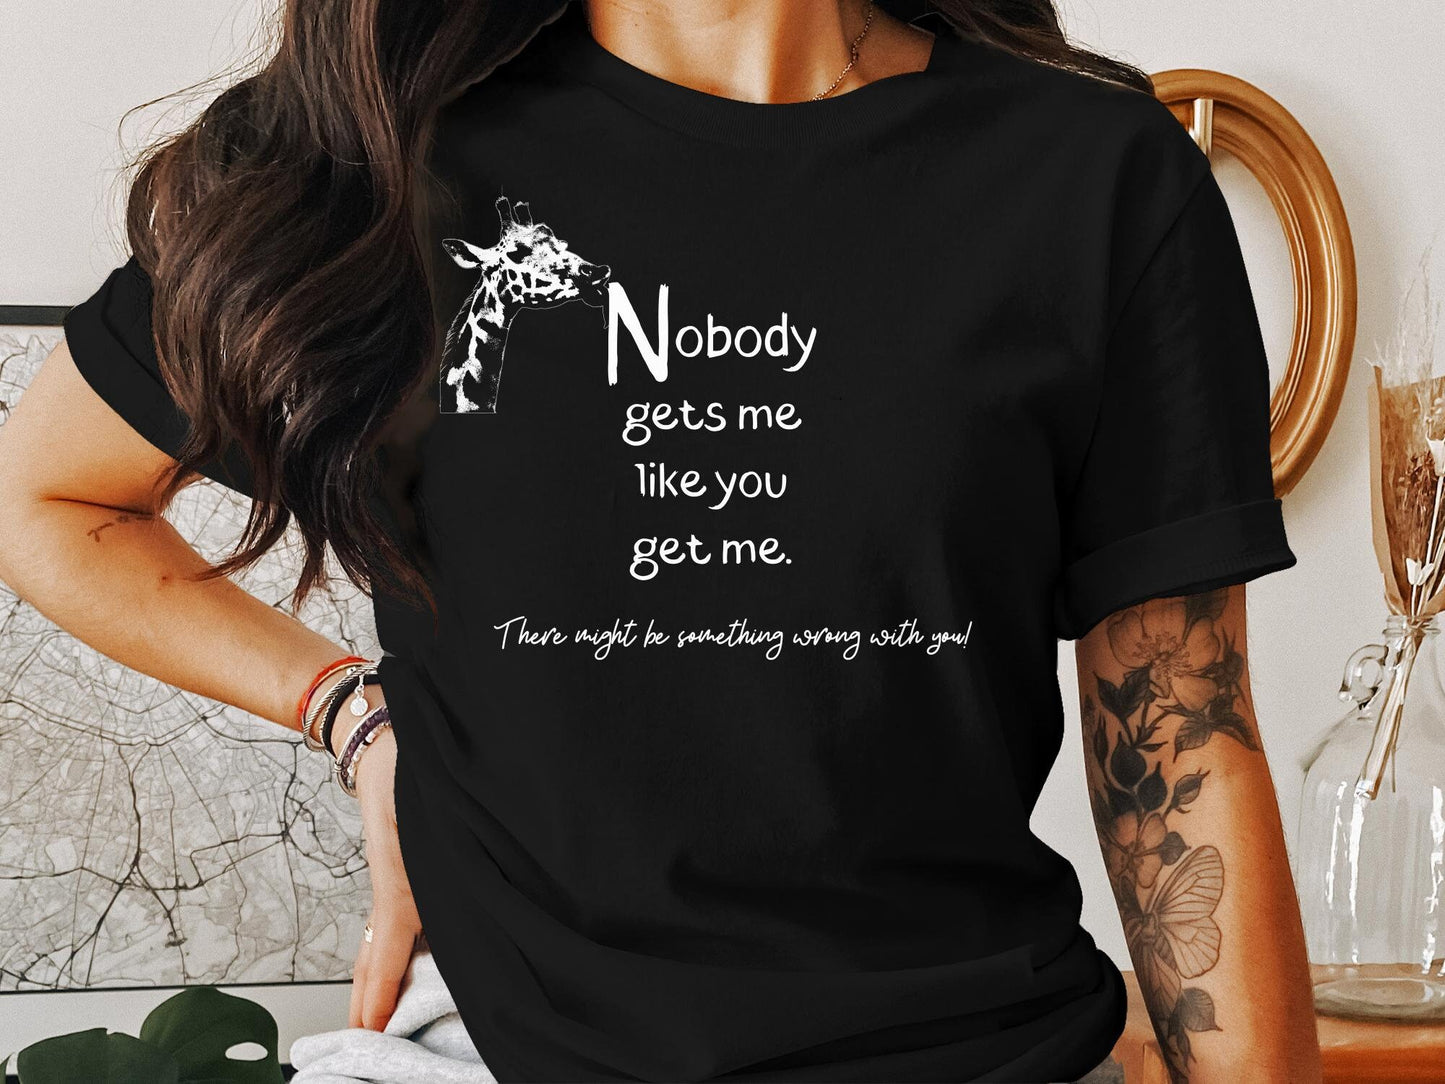 Nobody Gets Me Like You Get Me, There Might Be Something Wrong with You Shirt - Giraffe Friend Tee